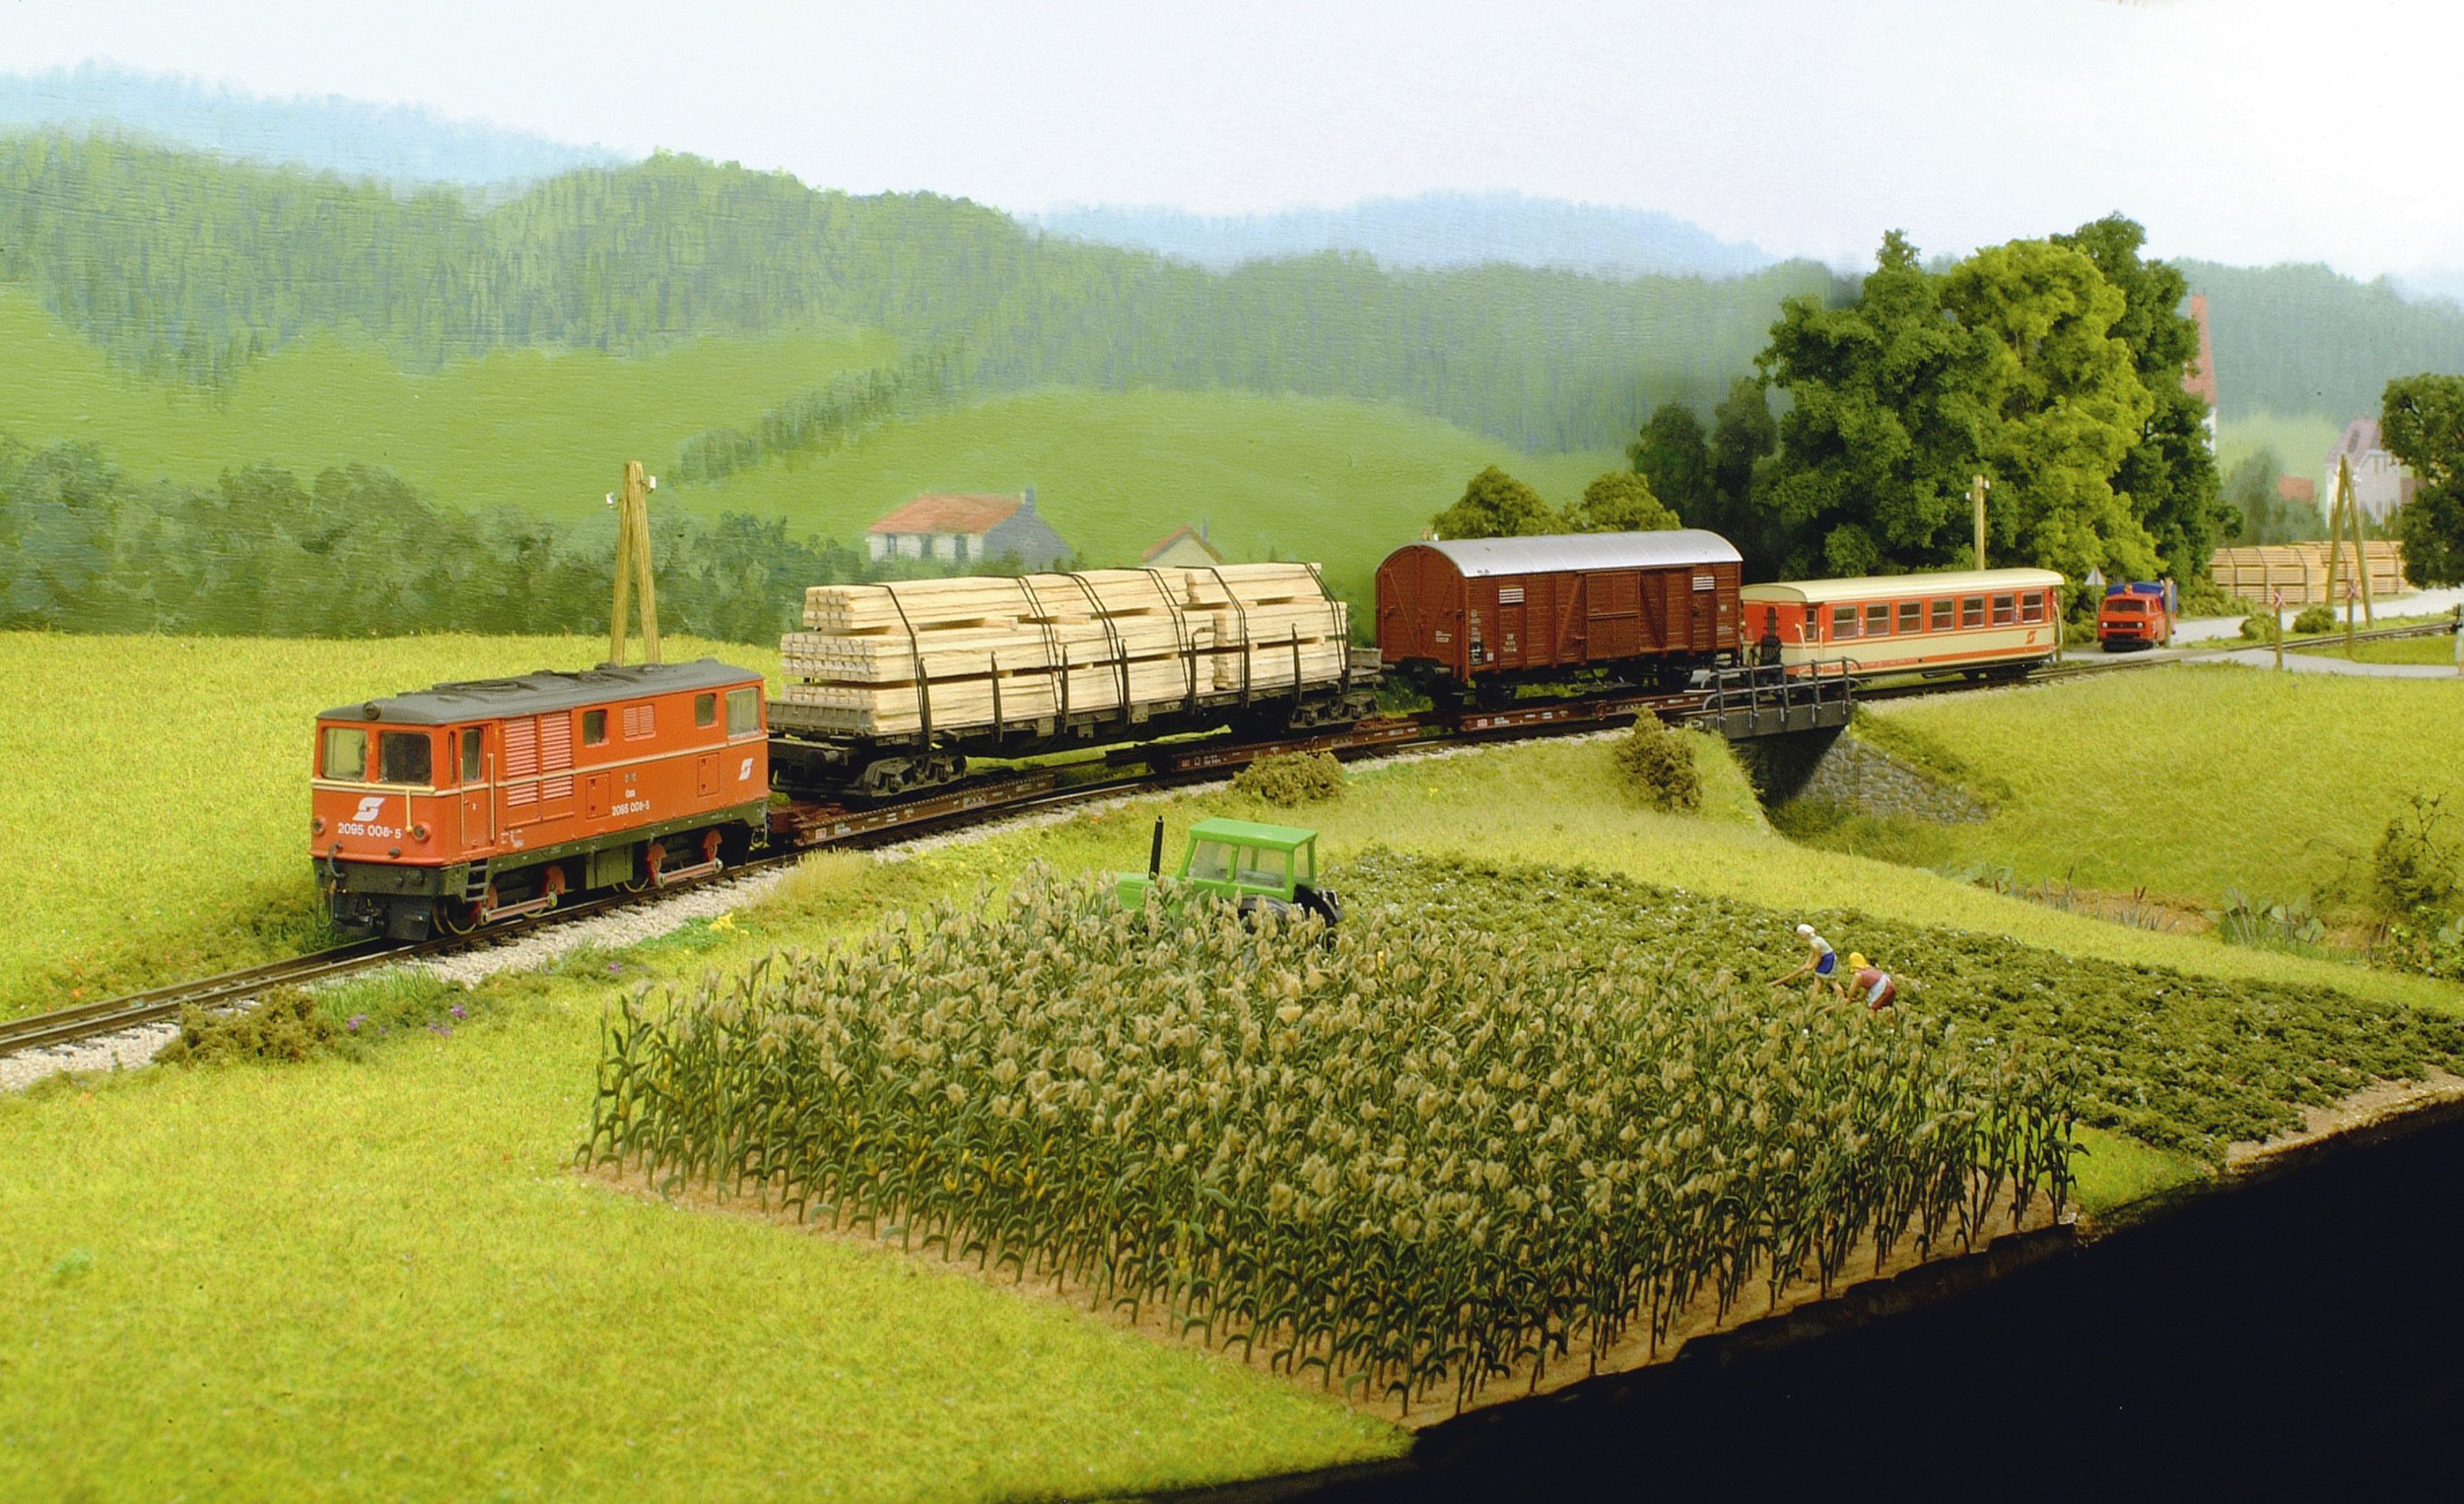 Narrow gauge railway operations in Austria will be represented by our latest overseas layout to join the Model World LIVE line up – Malcolm Rochford’s ‘HOe’ scale Gresten.